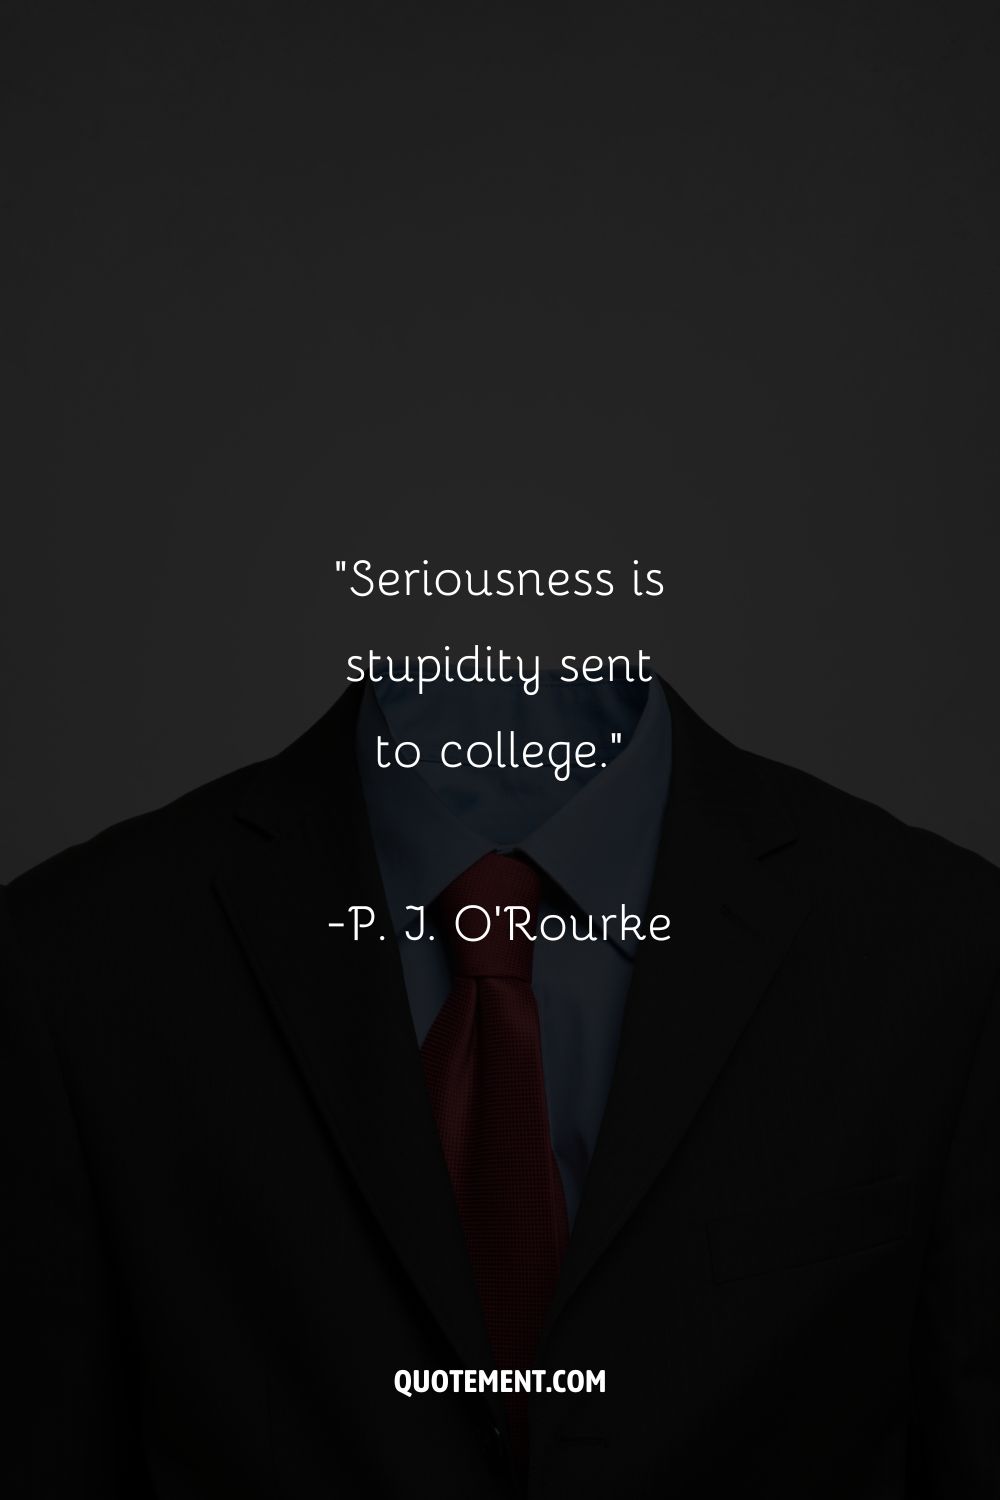 “Seriousness is stupidity sent to college.”